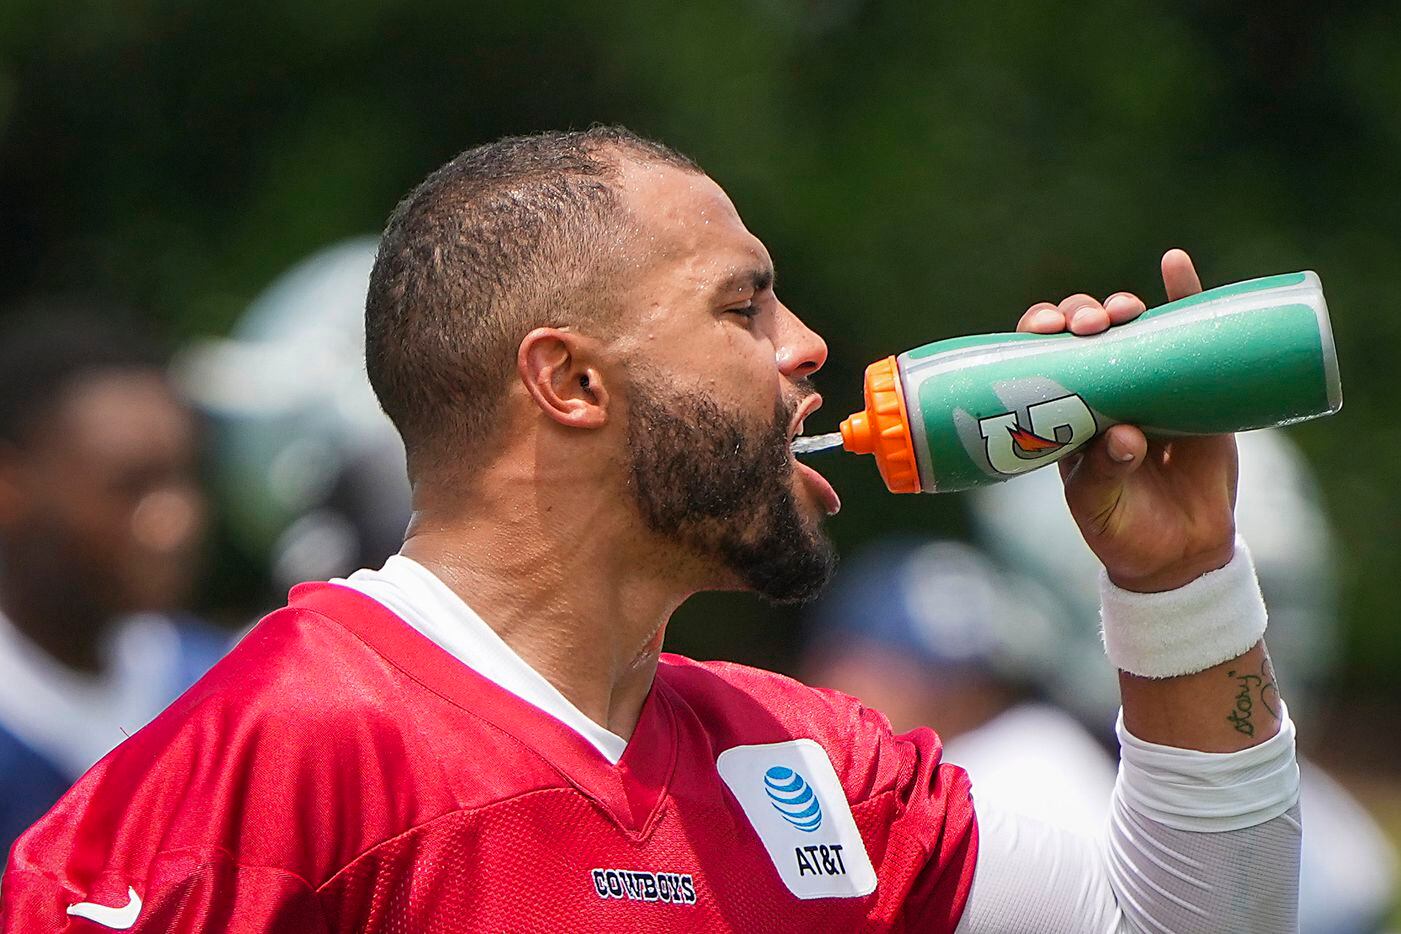 Dallas Cowboys quarterback Dak Prescott stays hydrated during a minicamp practice at The Star on Tuesday, June 8, 2021, in Frisco. (Smiley N. Pool/The Dallas Morning News)